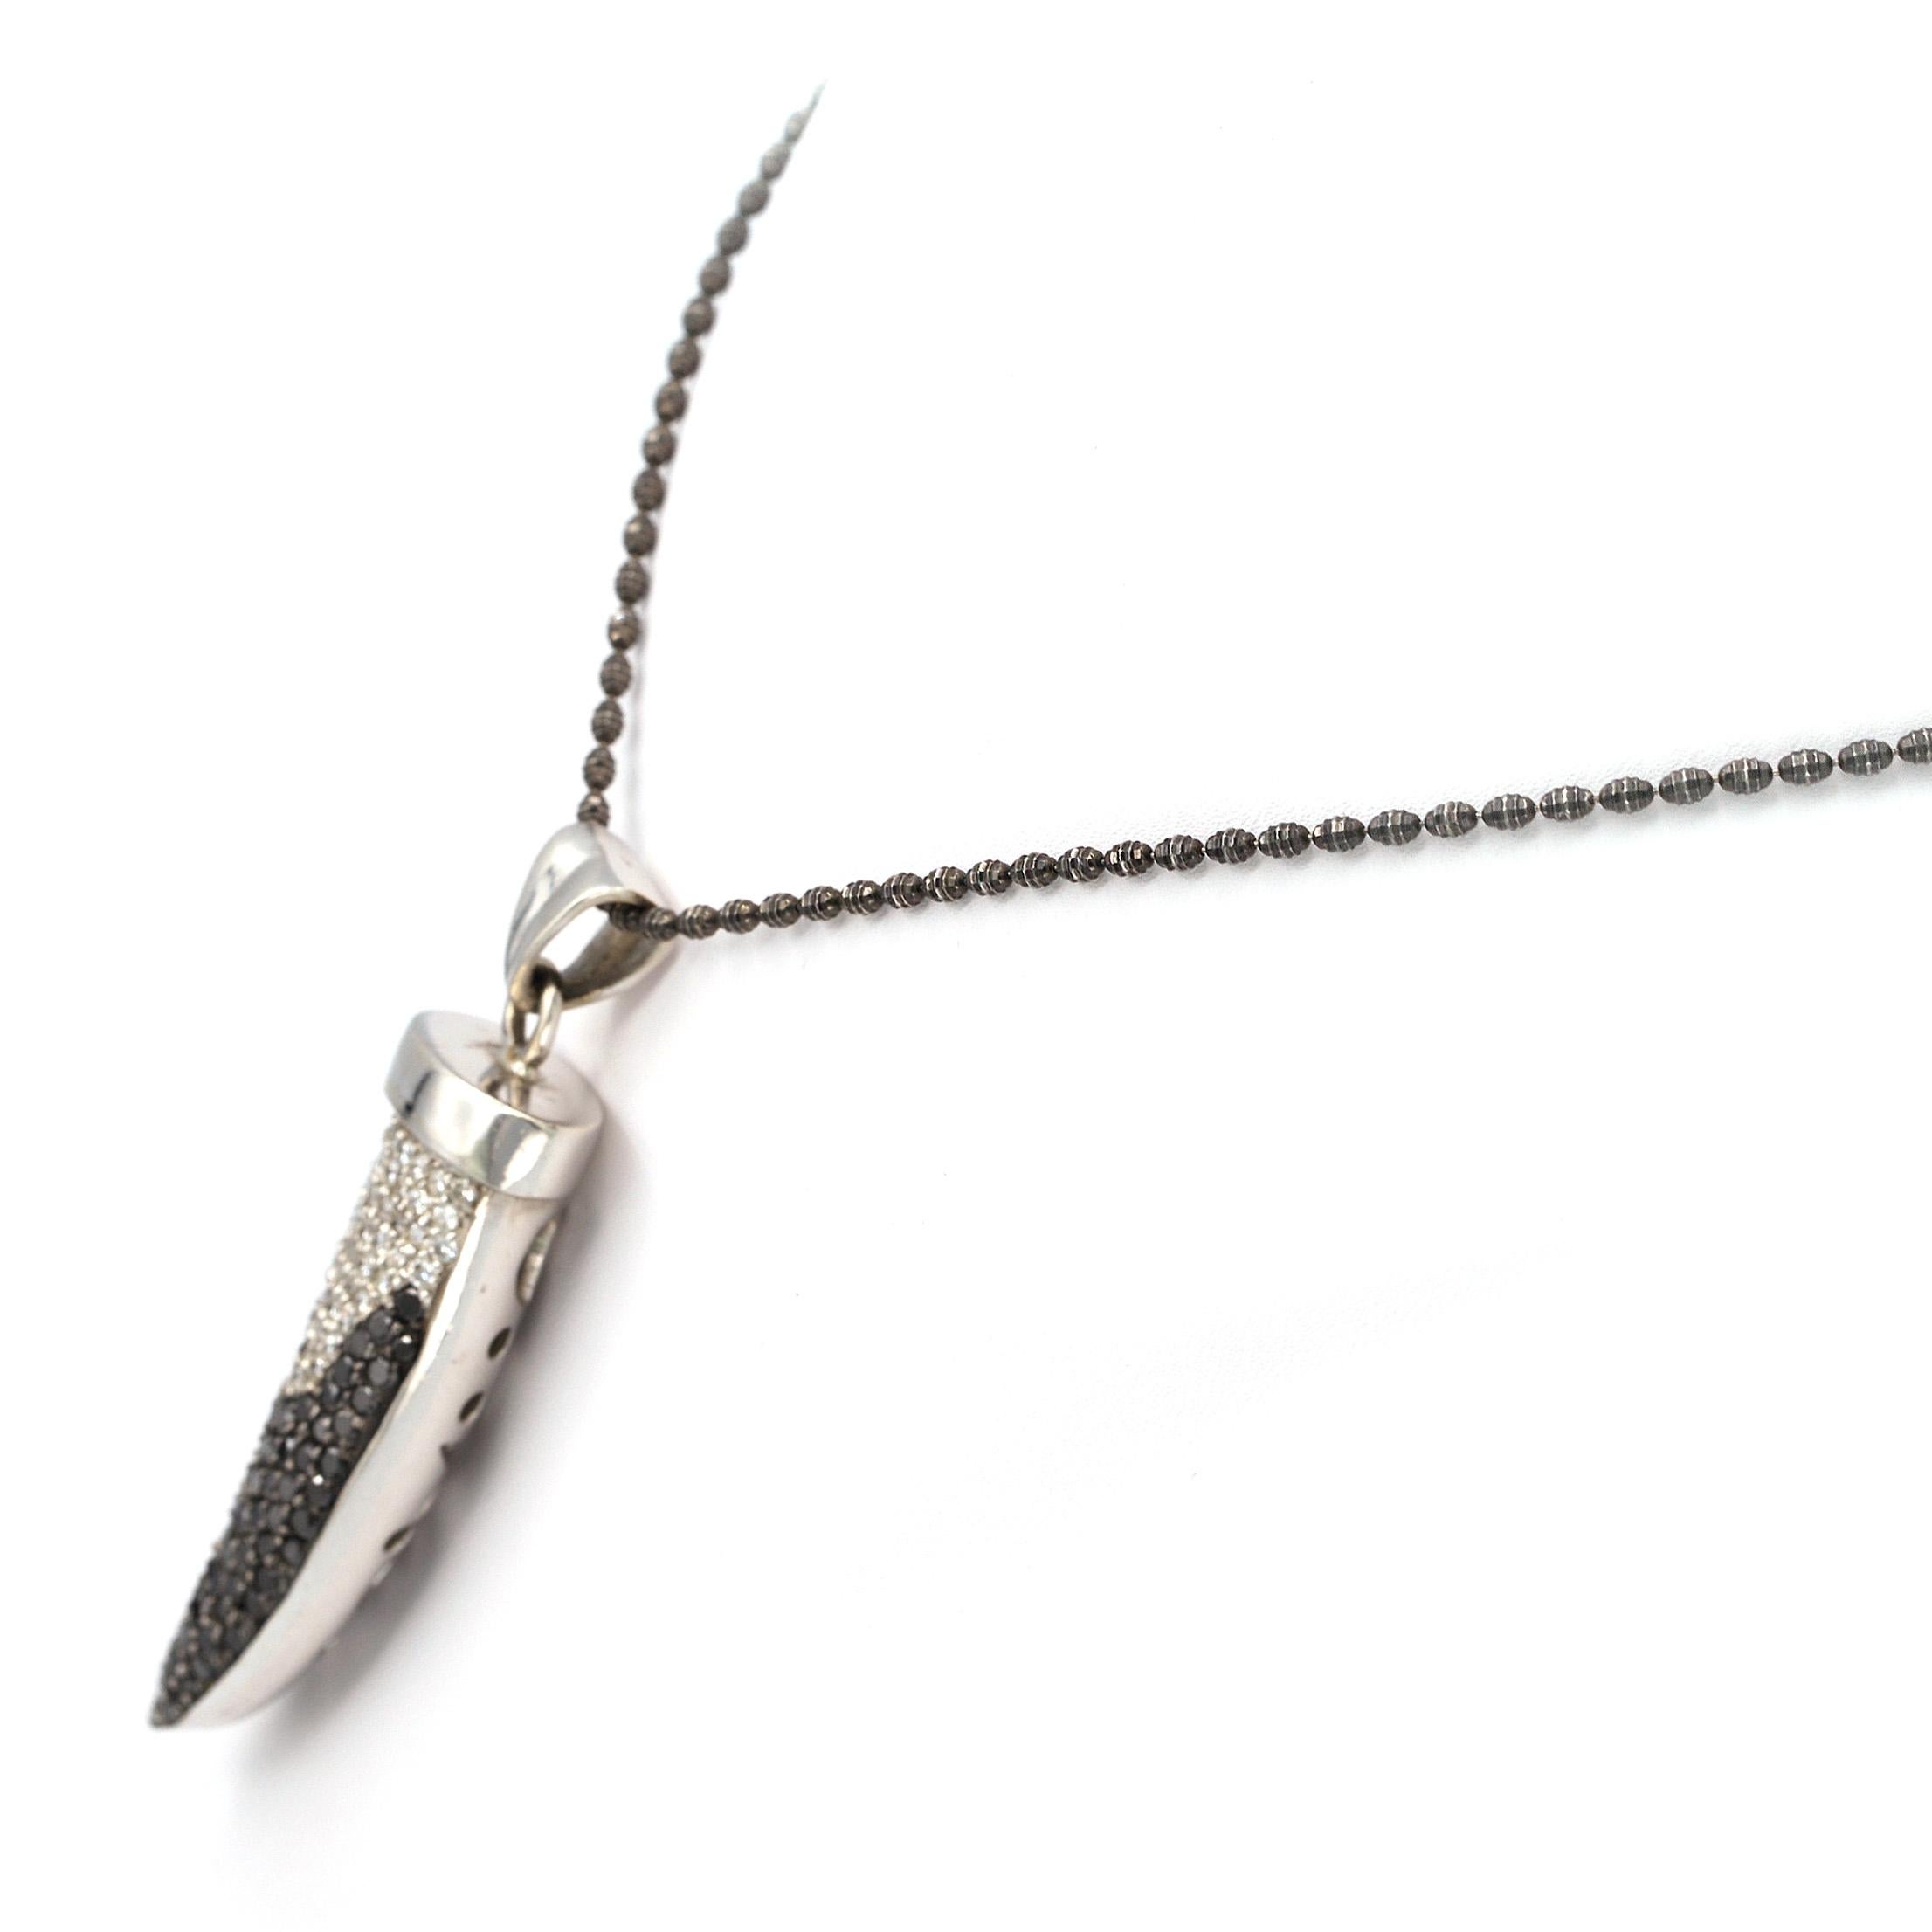 This Pendant has approximately 3.50 carats of black and white diamonds in this tooth shaped design. It contains approximately 57 white diamonds and 59 black diamonds. 
The pendant comes with a Black Rhodium Plated  14K chain that measures 39cm long.